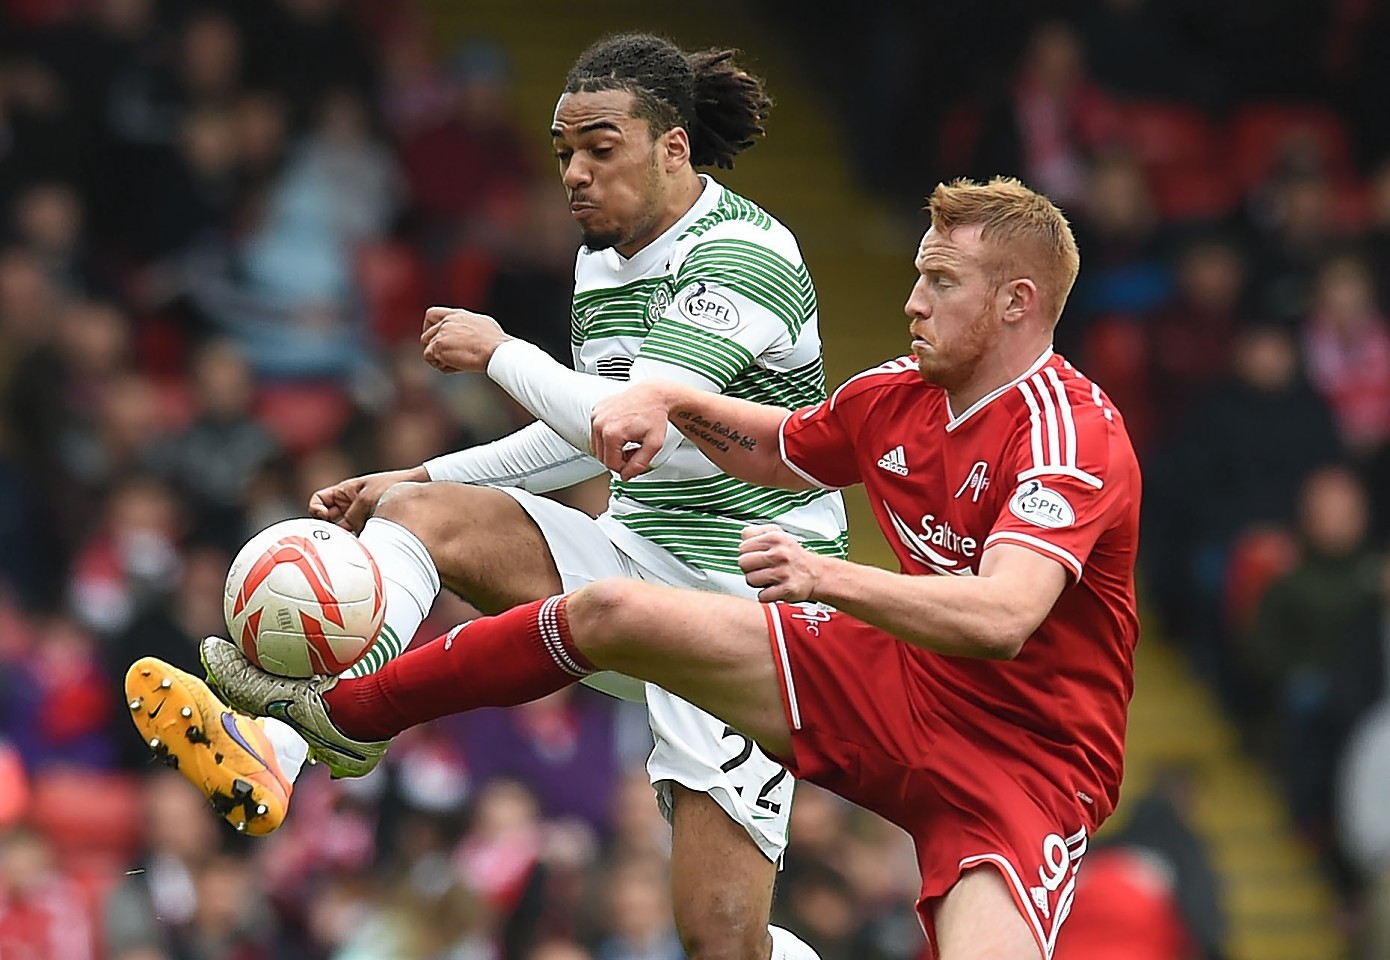 Adam Rooney (right) competes for the loose ball against Celtic's Jason Denayer